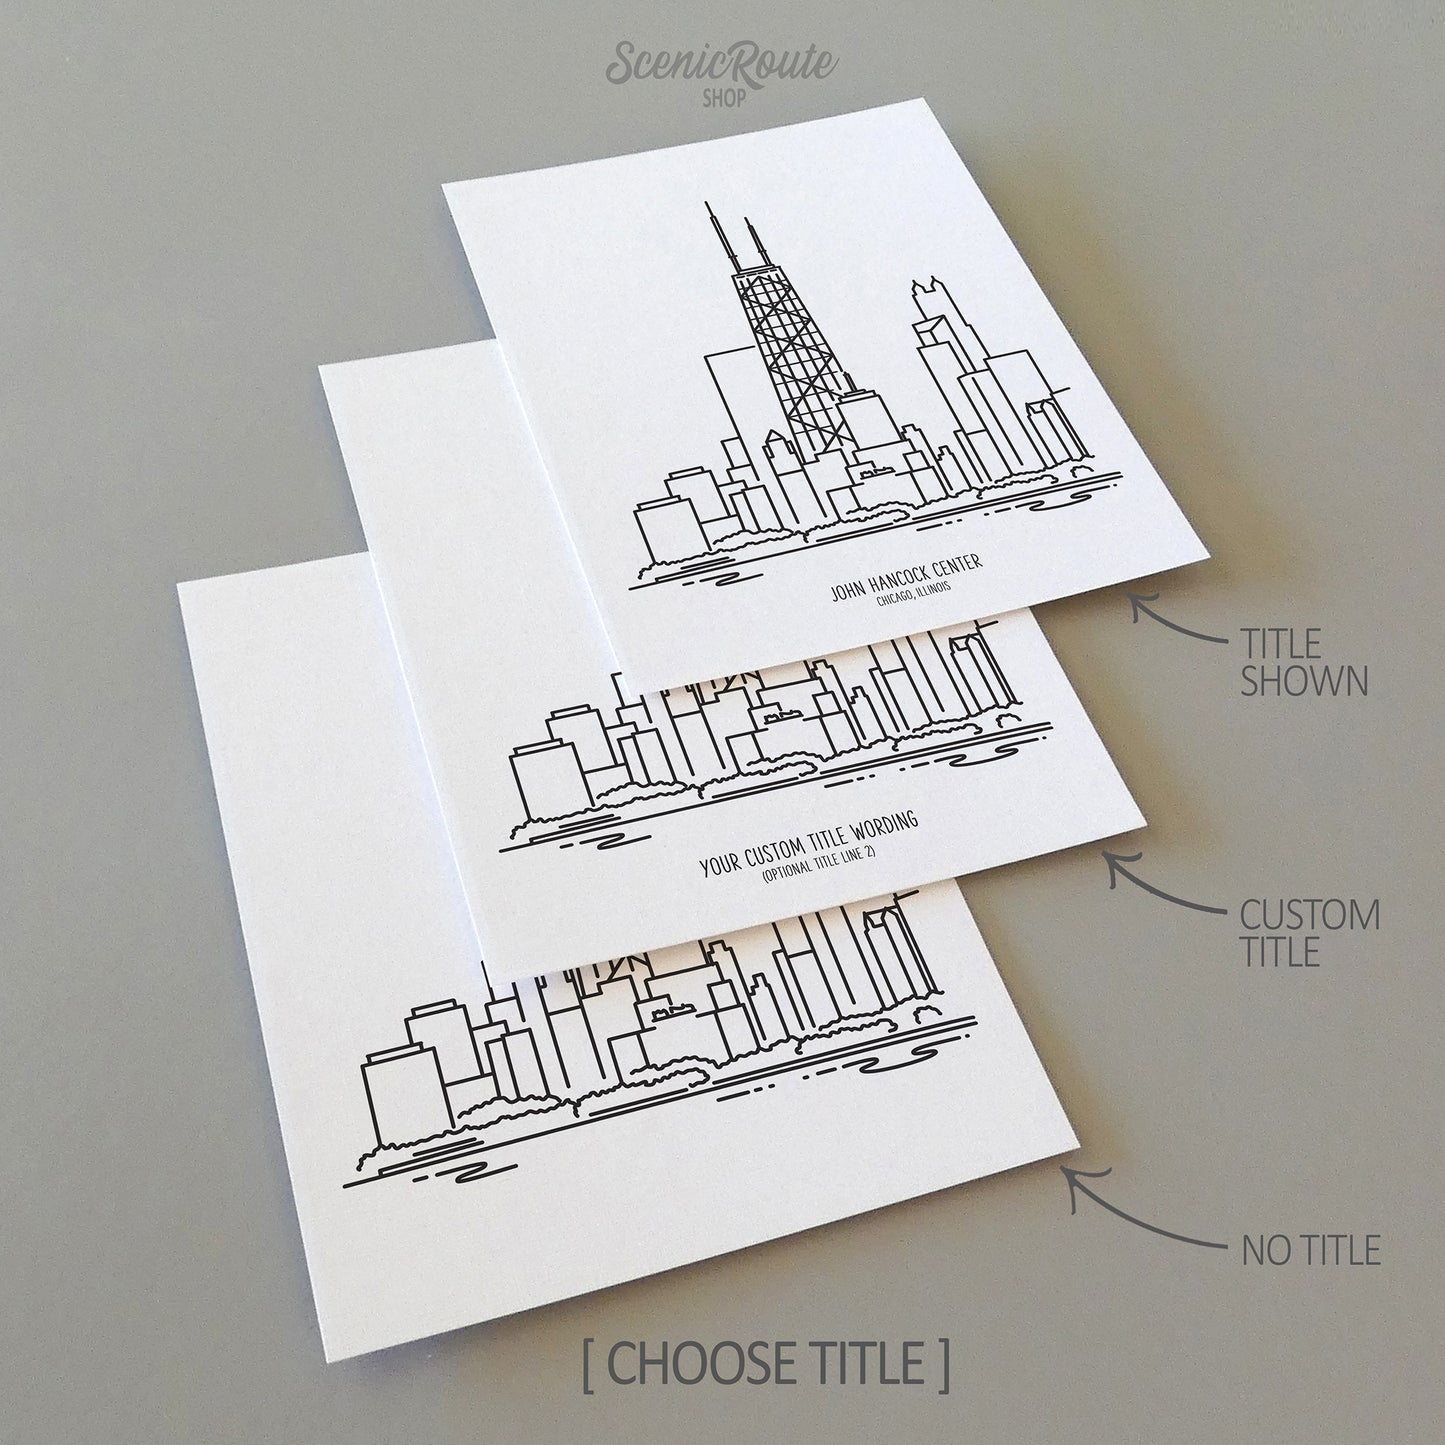 Three line art drawings of the John Hancock Tower Building on white linen paper with a gray background.  The pieces are shown with title options that can be chosen and personalized.